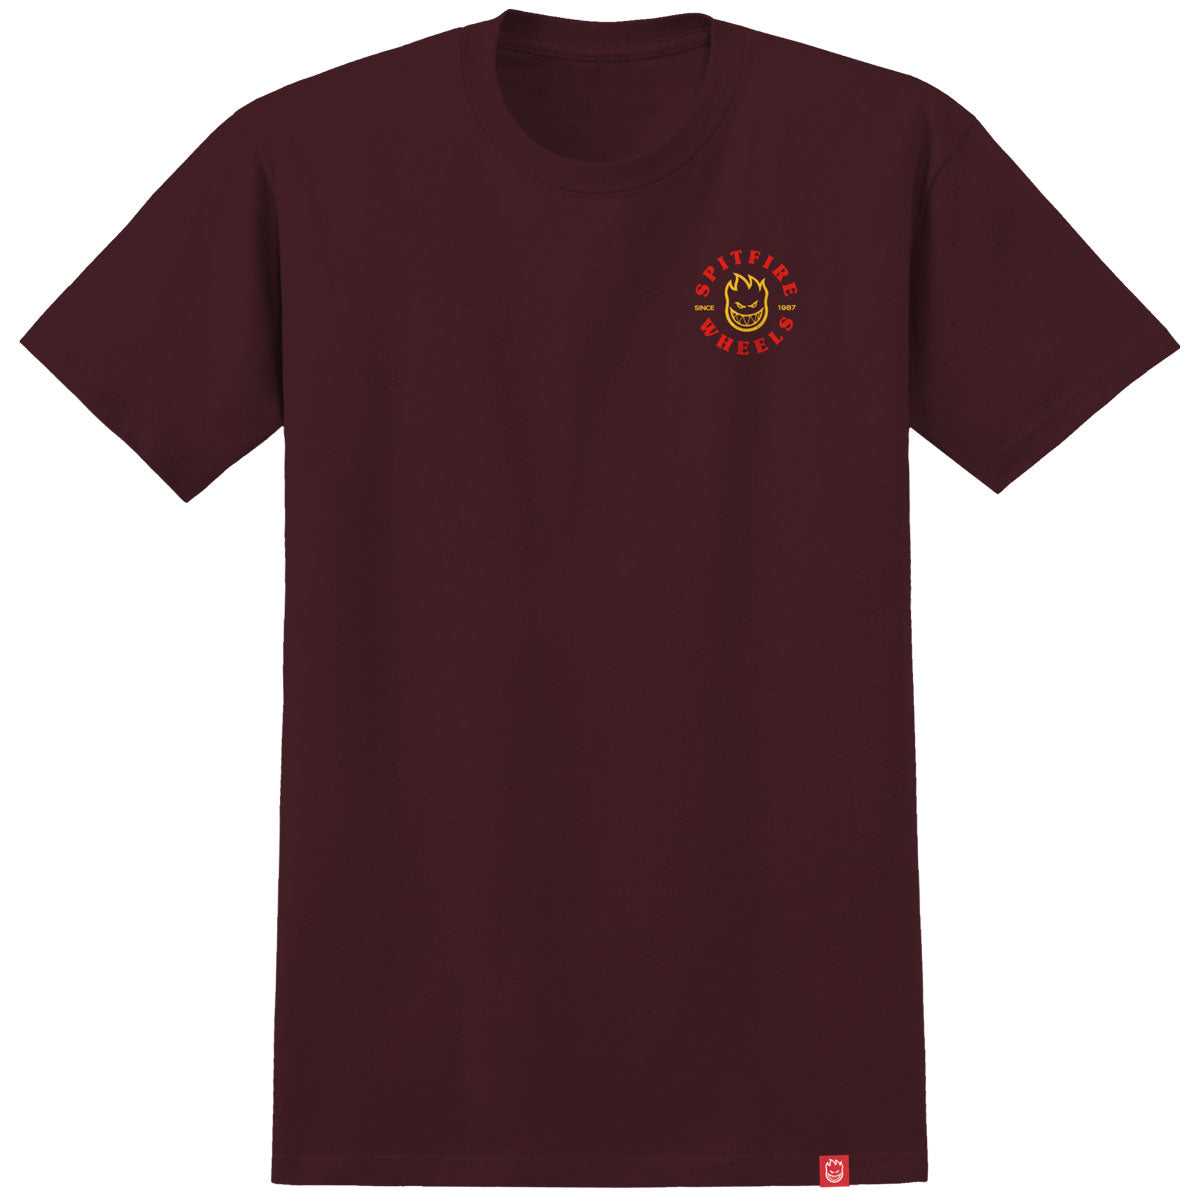 Spitfire Youth Bighead Classic T-Shirt - Maroon/Red/Yellow image 2